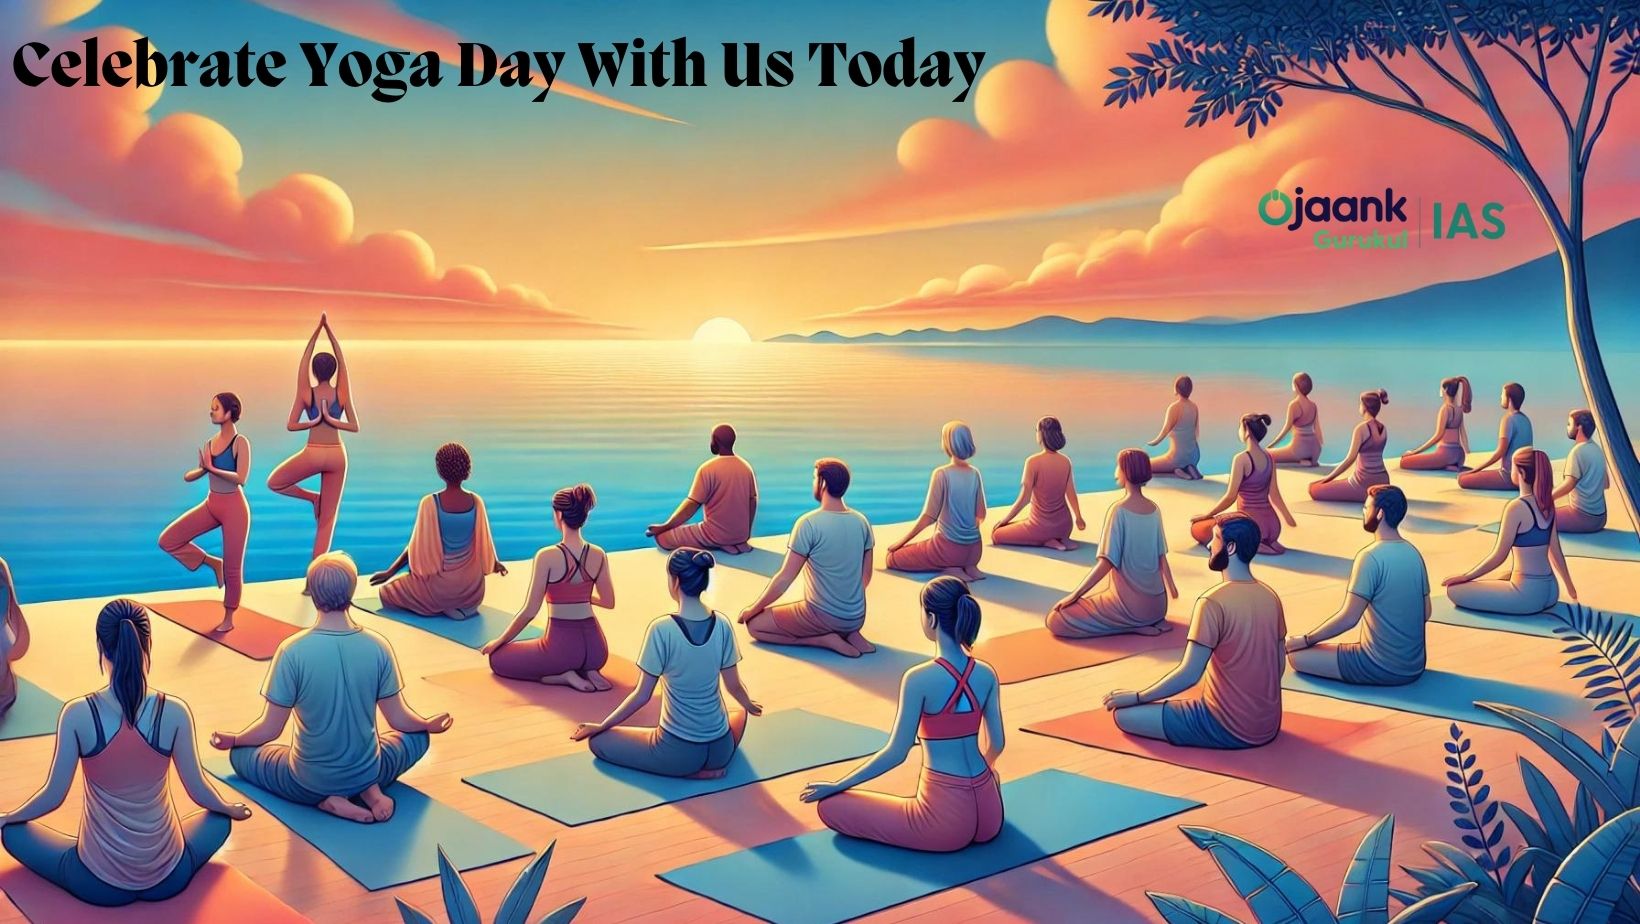 "International Yoga Day Unveiled: Discover the World's Most Spectacular Yoga Gatherings!"